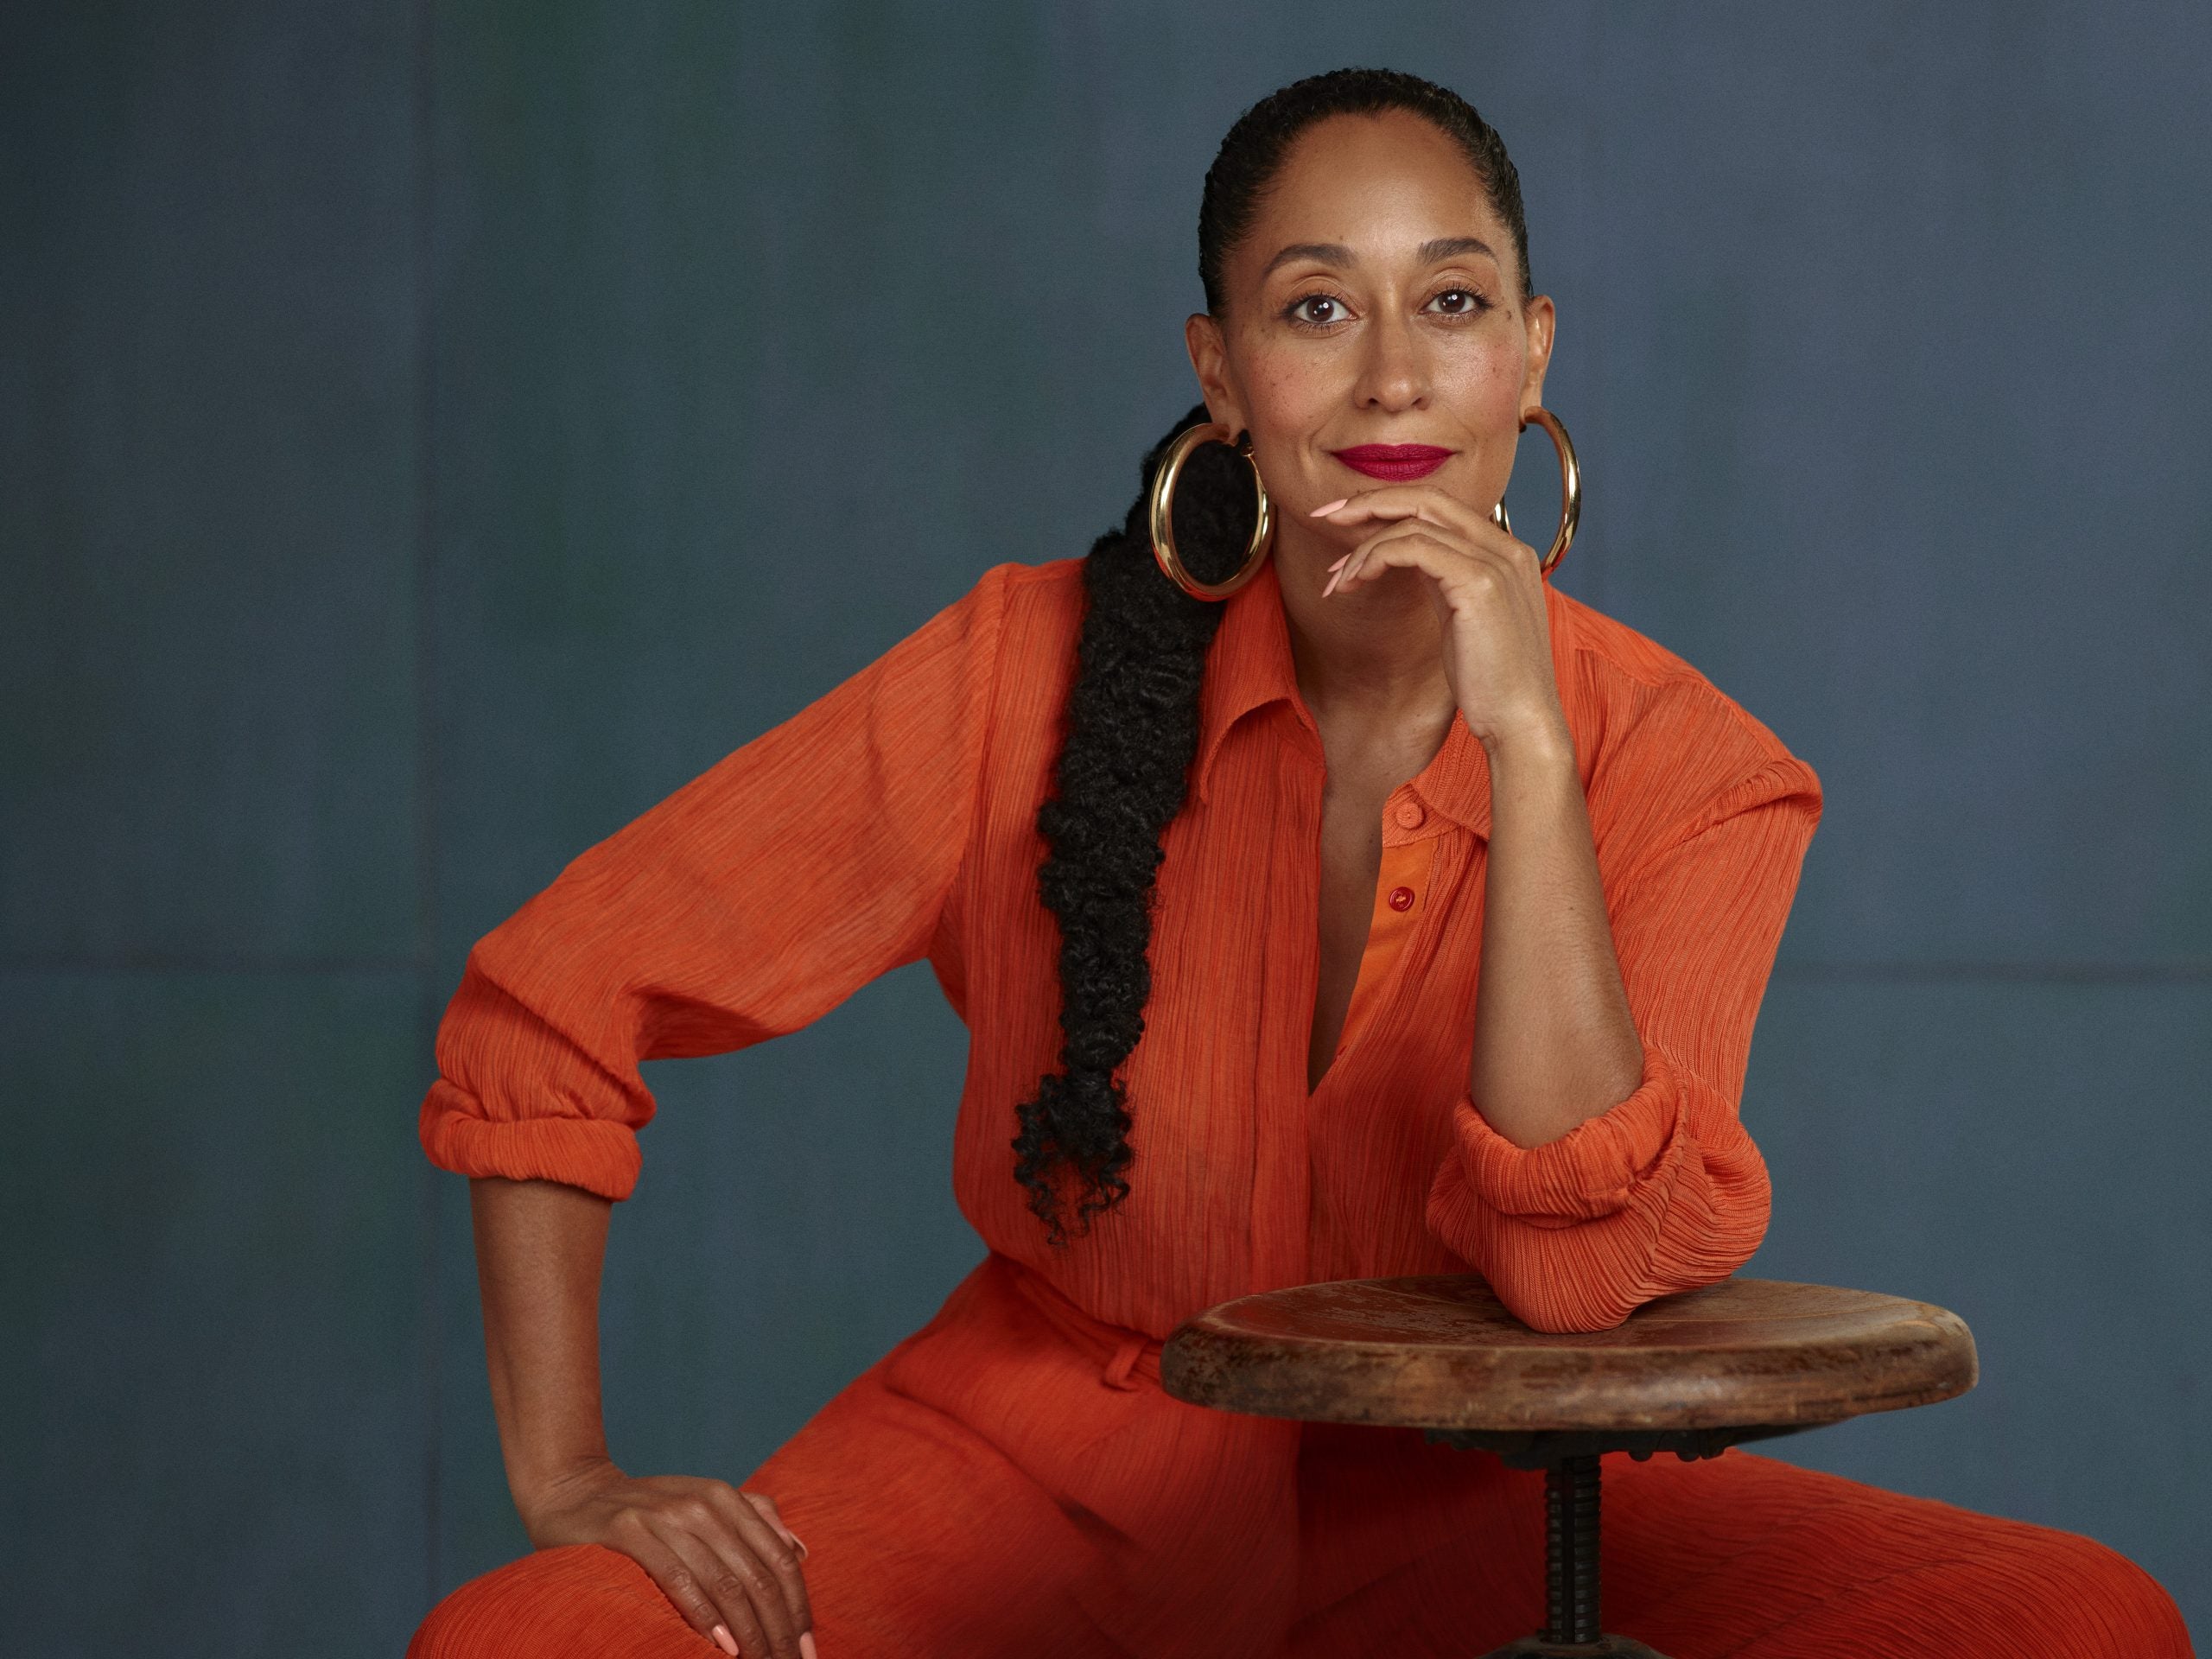 Tracee Ellis Ross Discusses Why She’s Not The Typical Celeb CEO Of A Beauty Company: “It’s My Baby”